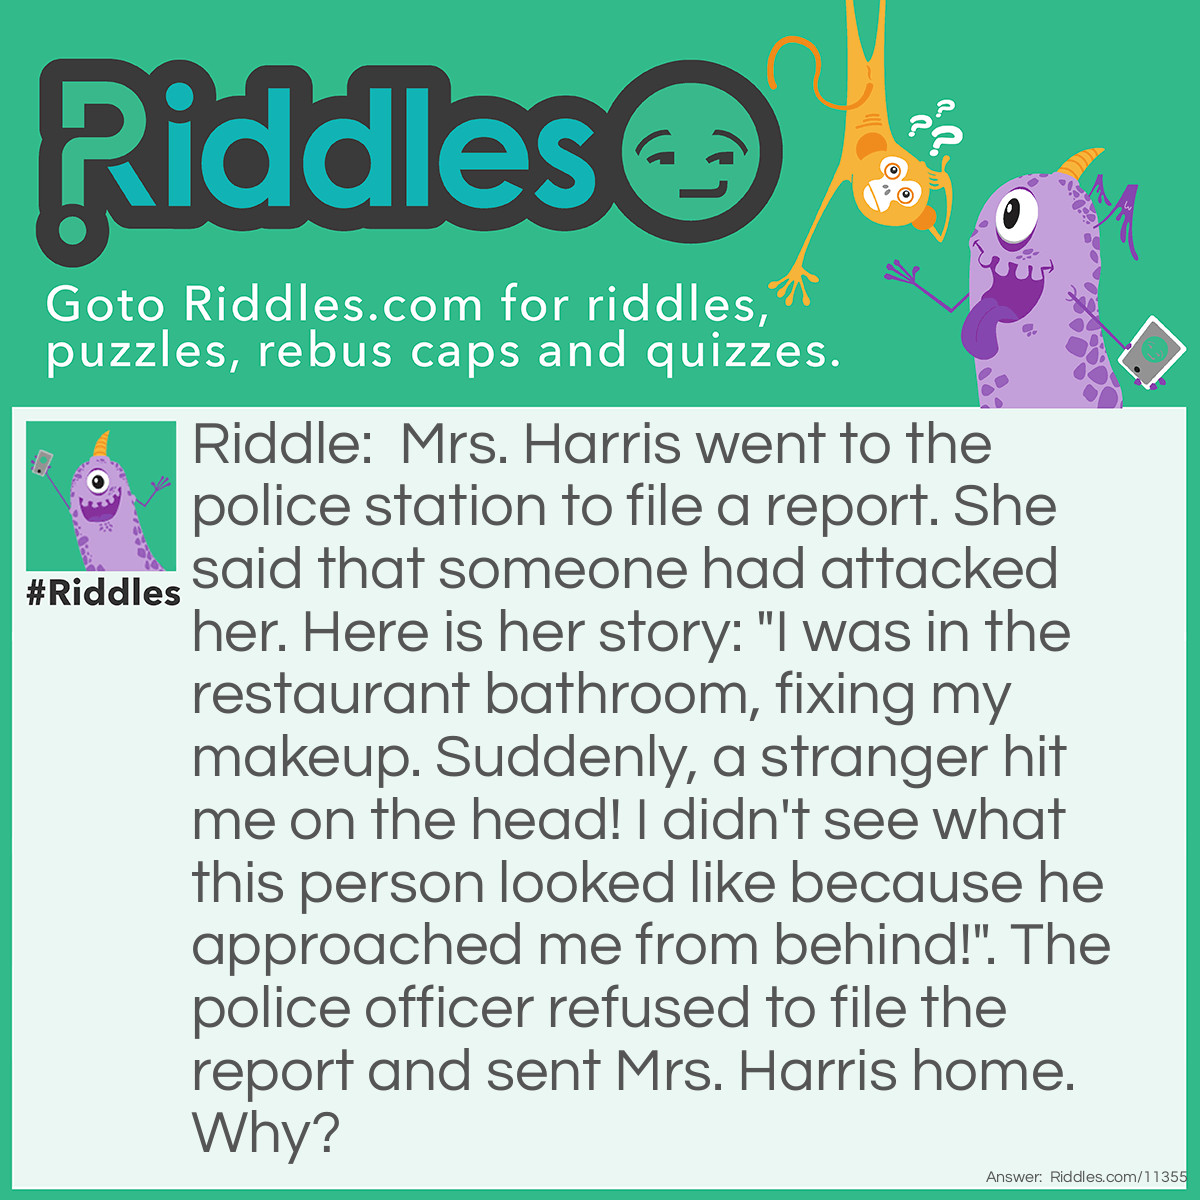 Riddle: Mrs. Harris went to the police station to file a report. She said that someone had attacked her. Here is her story: "I was in the restaurant bathroom, fixing my makeup. Suddenly, a stranger hit me on the head! I didn't see what this person looked like because he approached me from behind!". The police officer refused to file the report and sent Mrs. Harris home. Why? Answer: If Mrs. Harris was fixing her makeup, she was most likely looking in the mirror (after all, she wouldn't want to ruin her makeup, right?). If someone had approached the woman from behind, she would have DEFINITELY seen what he or she looked like. Therefore, Mrs. Harris lied, and made up the whole story.